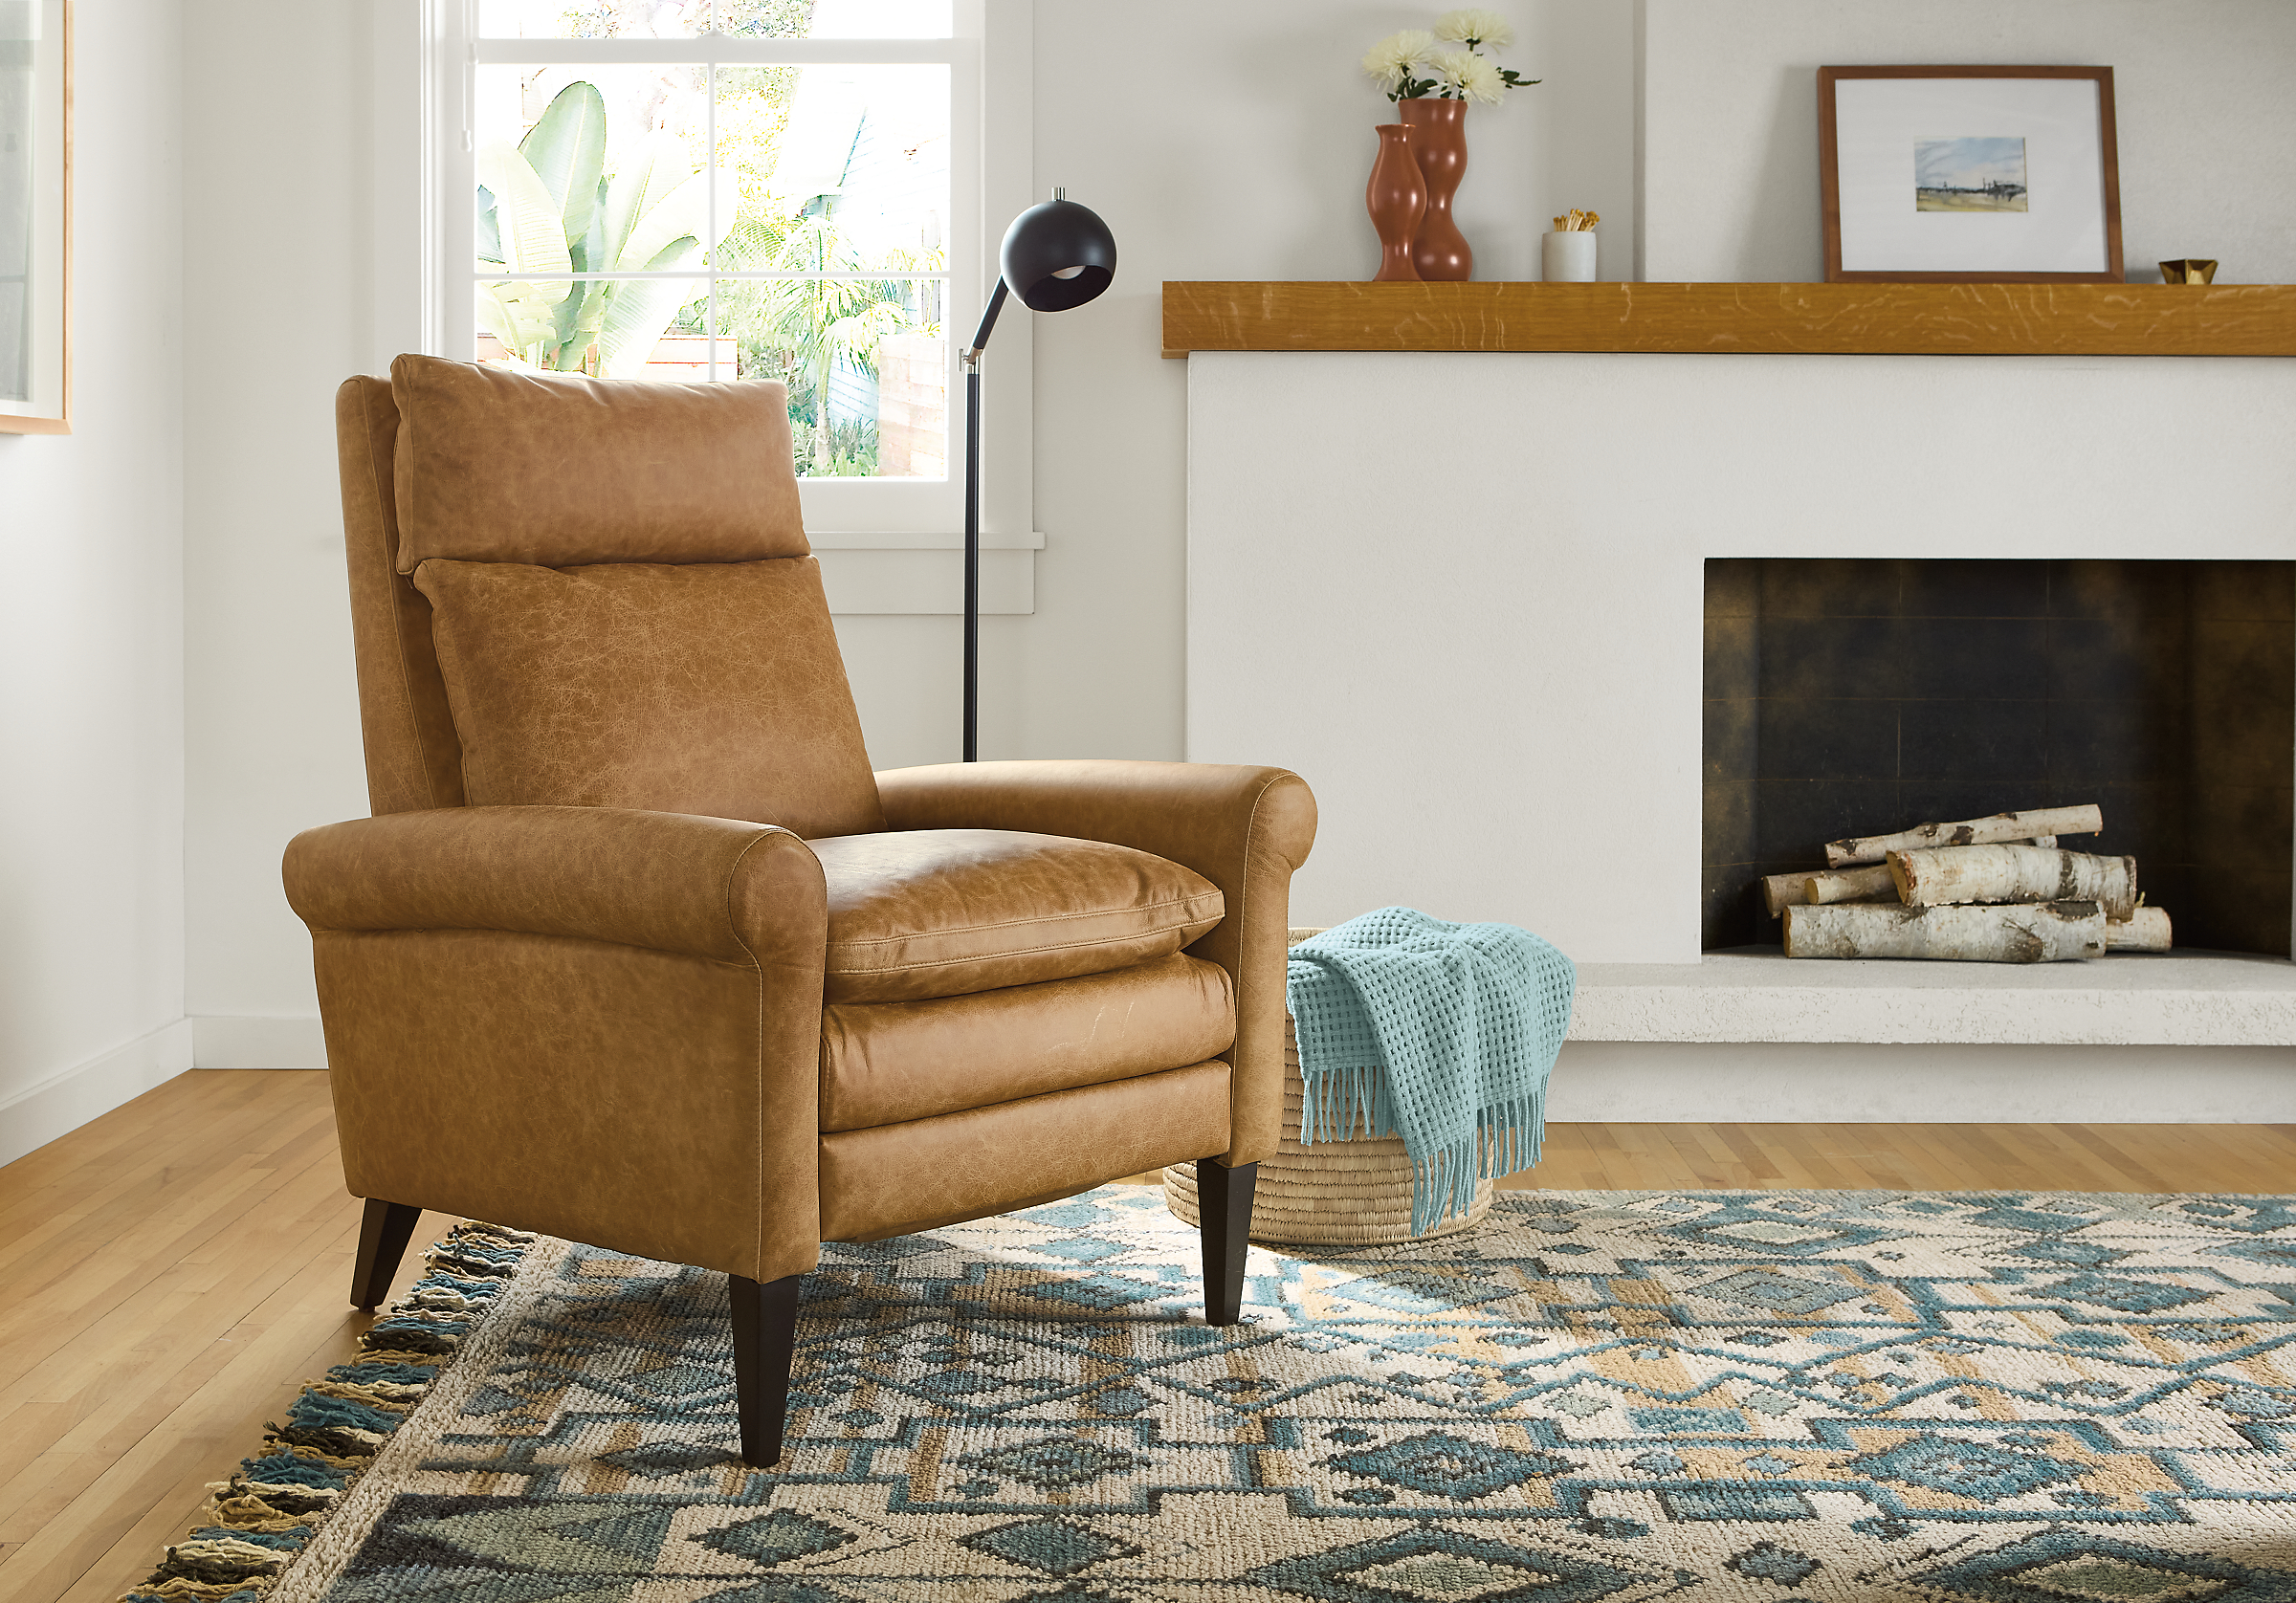 Living room with Isaac recliner in Palermo Camel leather, Ona rug in Ocean and Camber floor lamp in black.